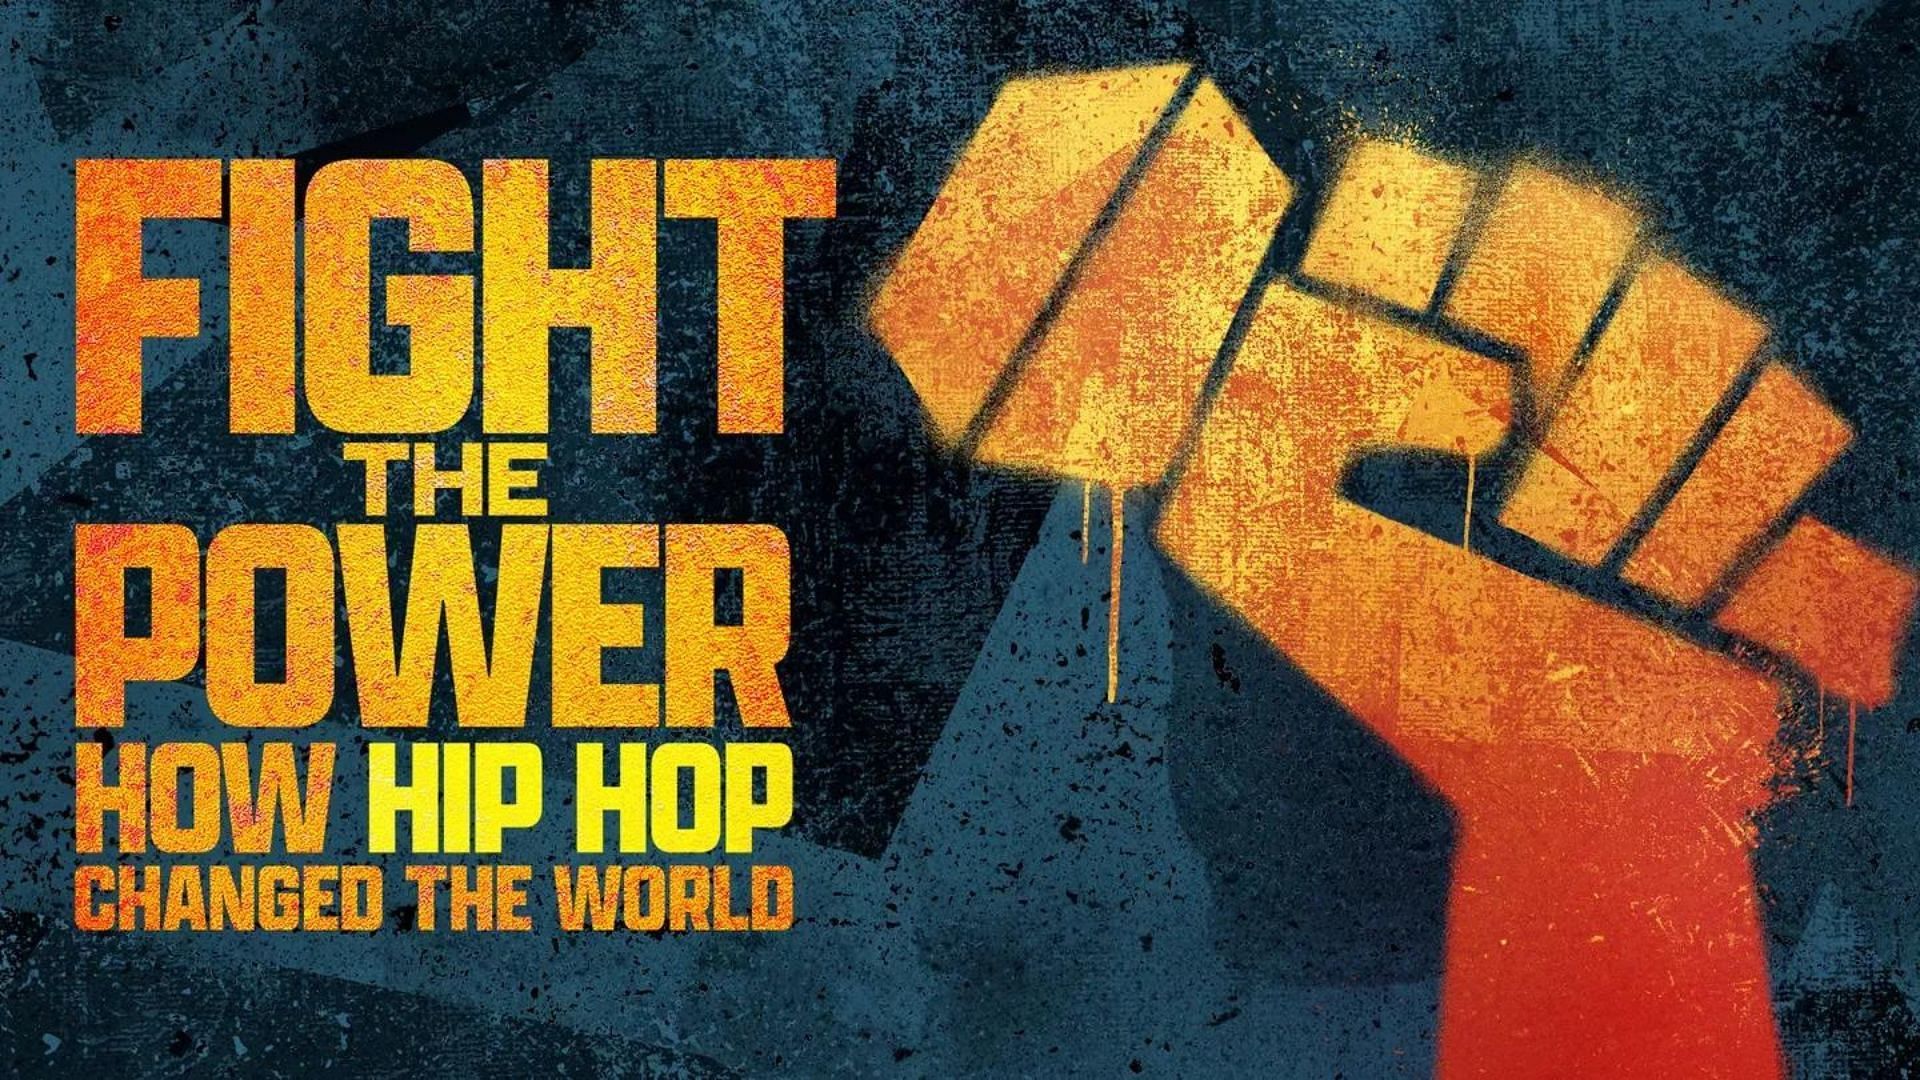 Poster for Fight the Power: How Hip Hop Changed the World (Image Via PBS)